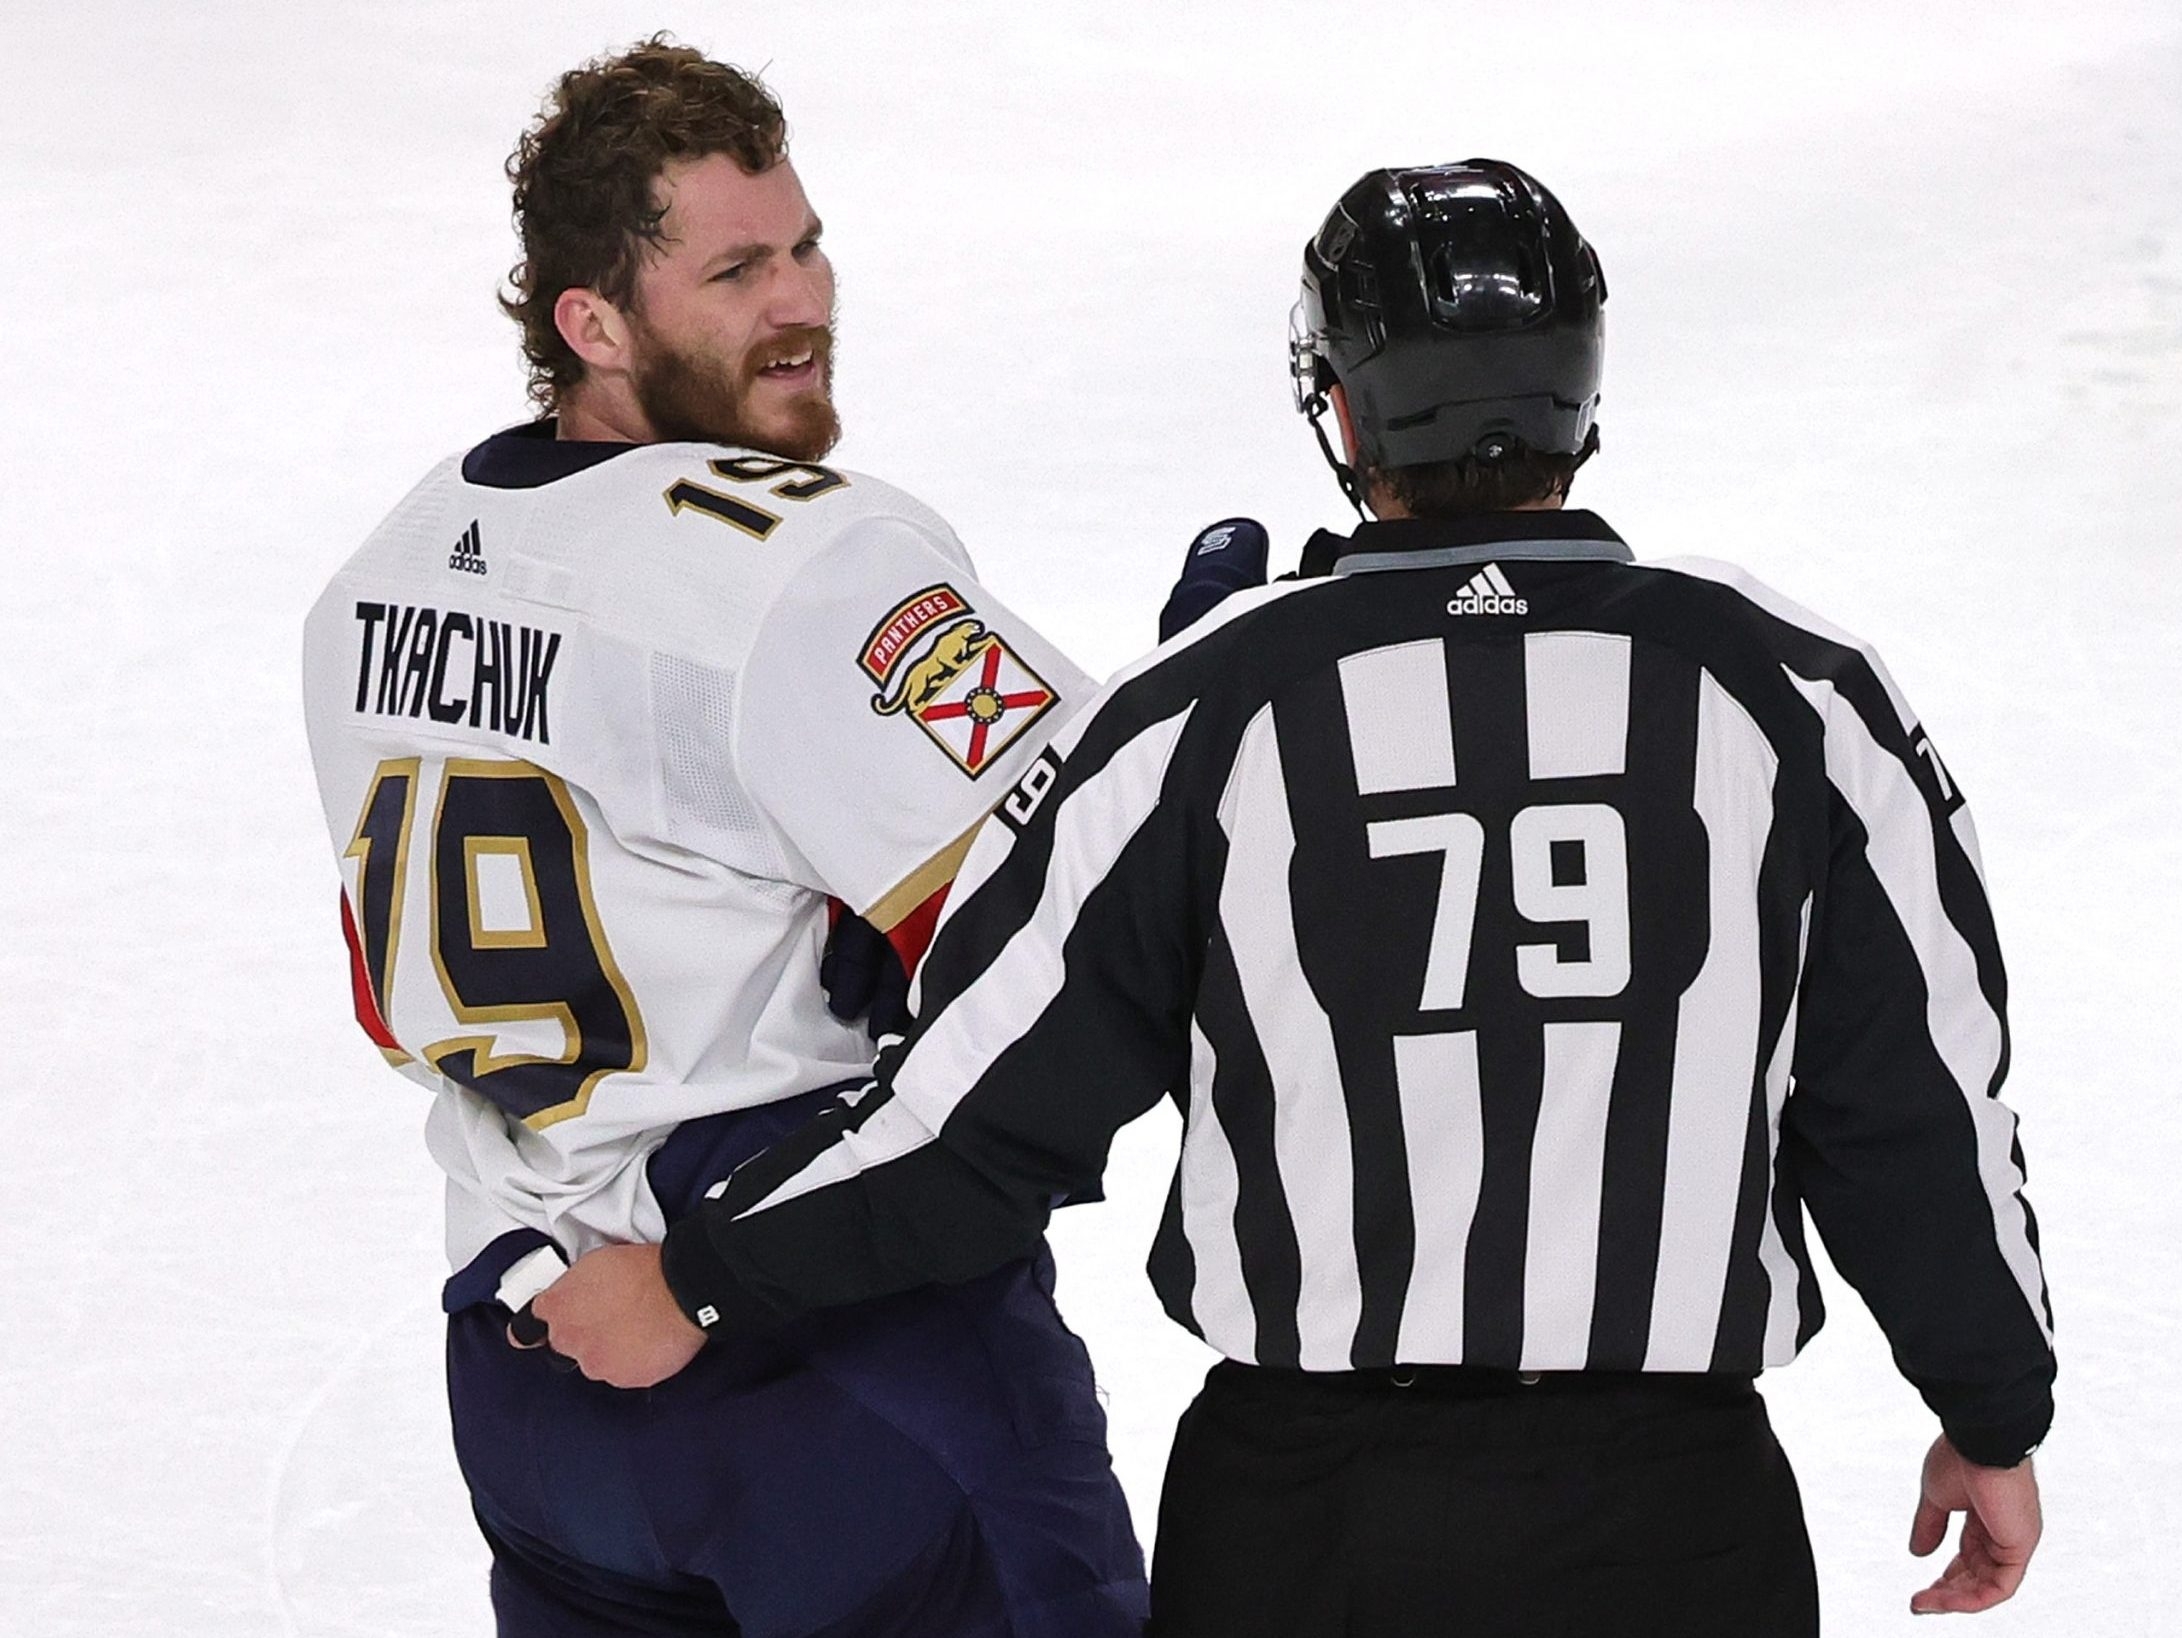 pest or stanley cup champion: florida panthers star matthew tkachuk can't be both